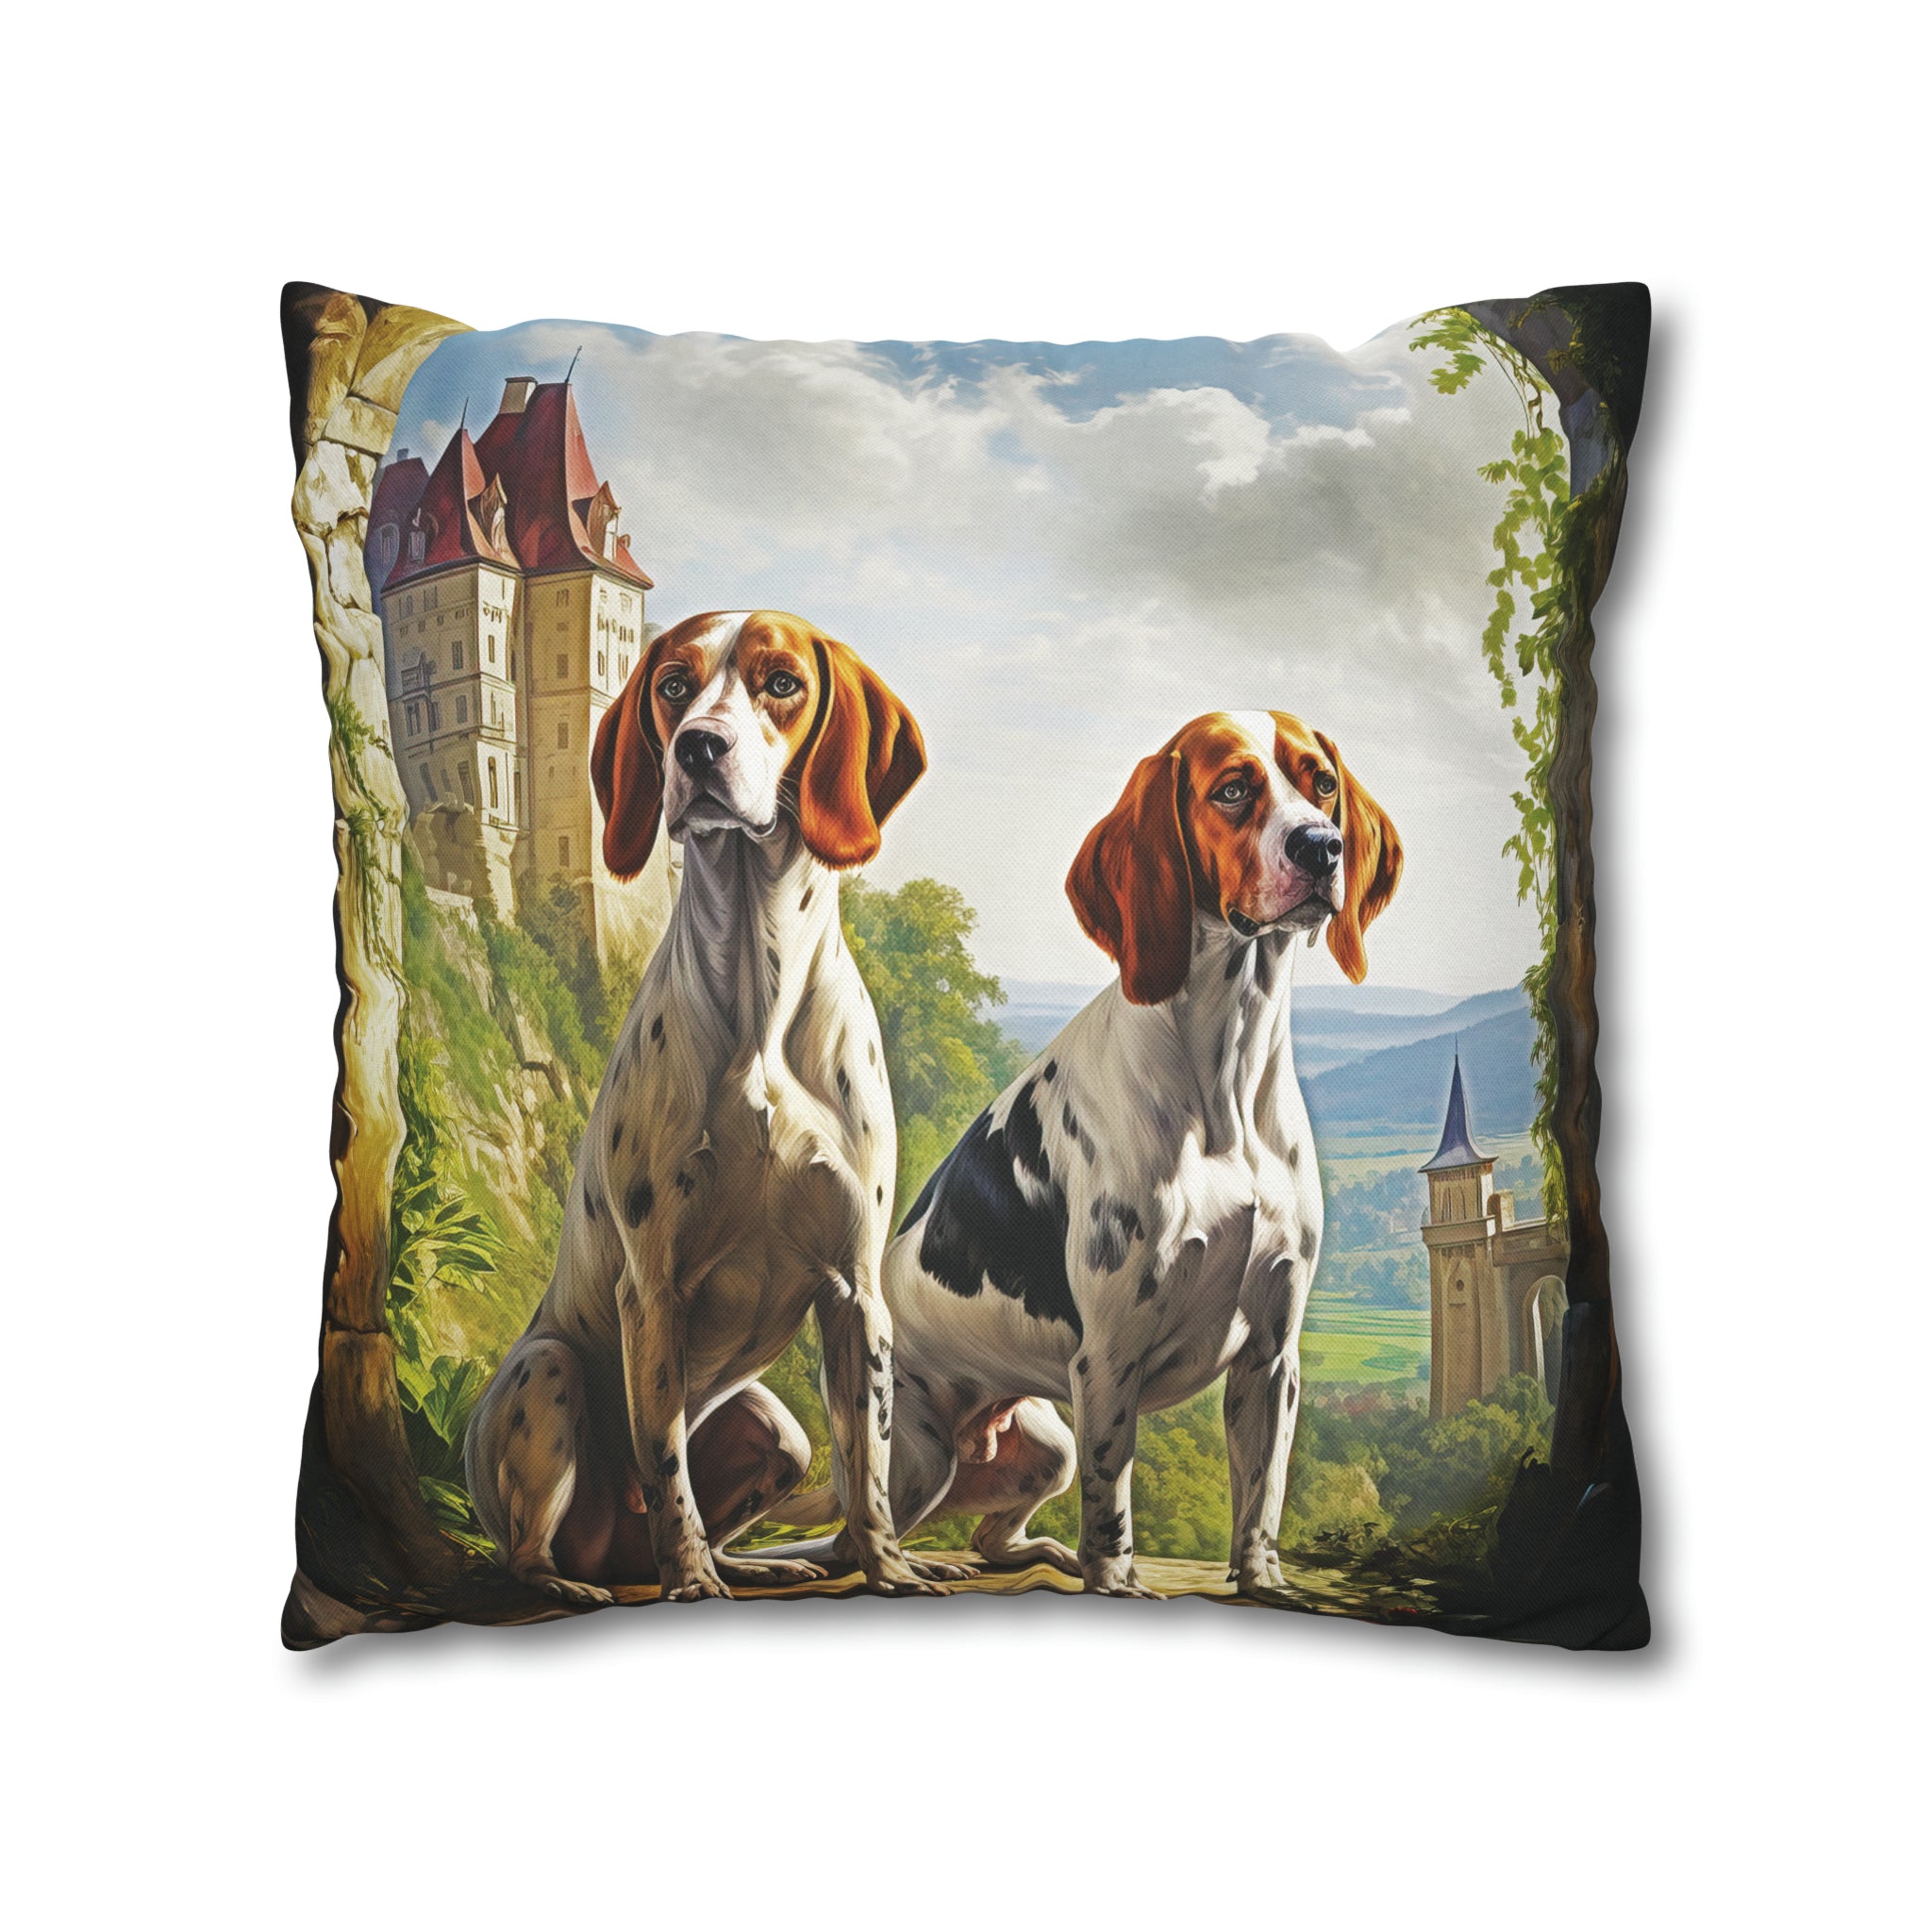 Square Pillow Case 18" x 18", CASE ONLY, no pillow form, original Art ,Colorful, Two Hunting Hounds in the French Countryside